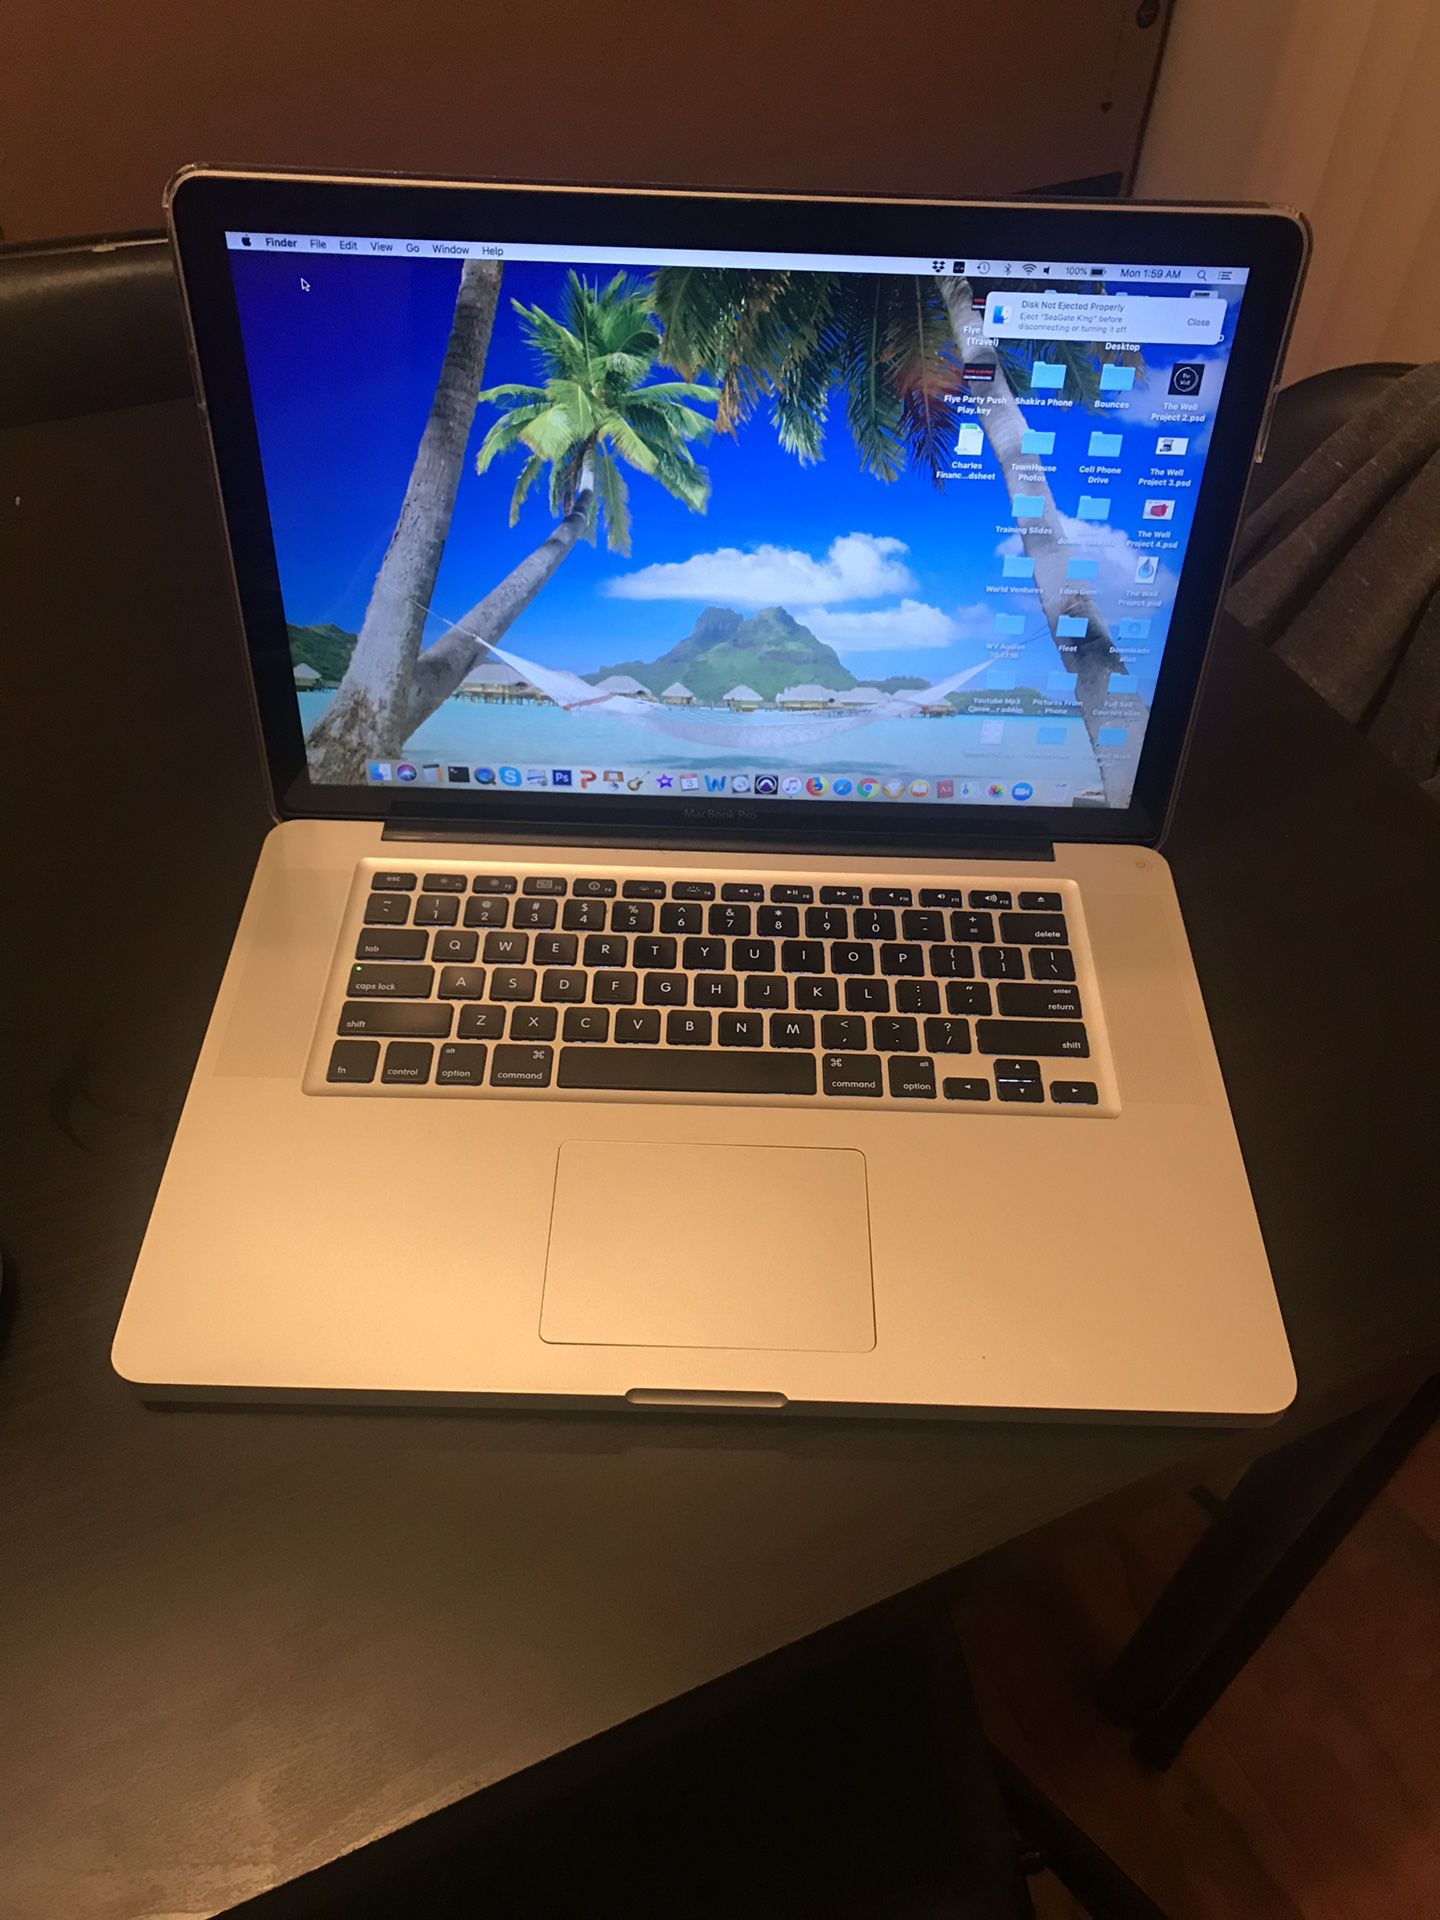 15” MacBook Pro w/ Adobe Suite and Music Software Installed